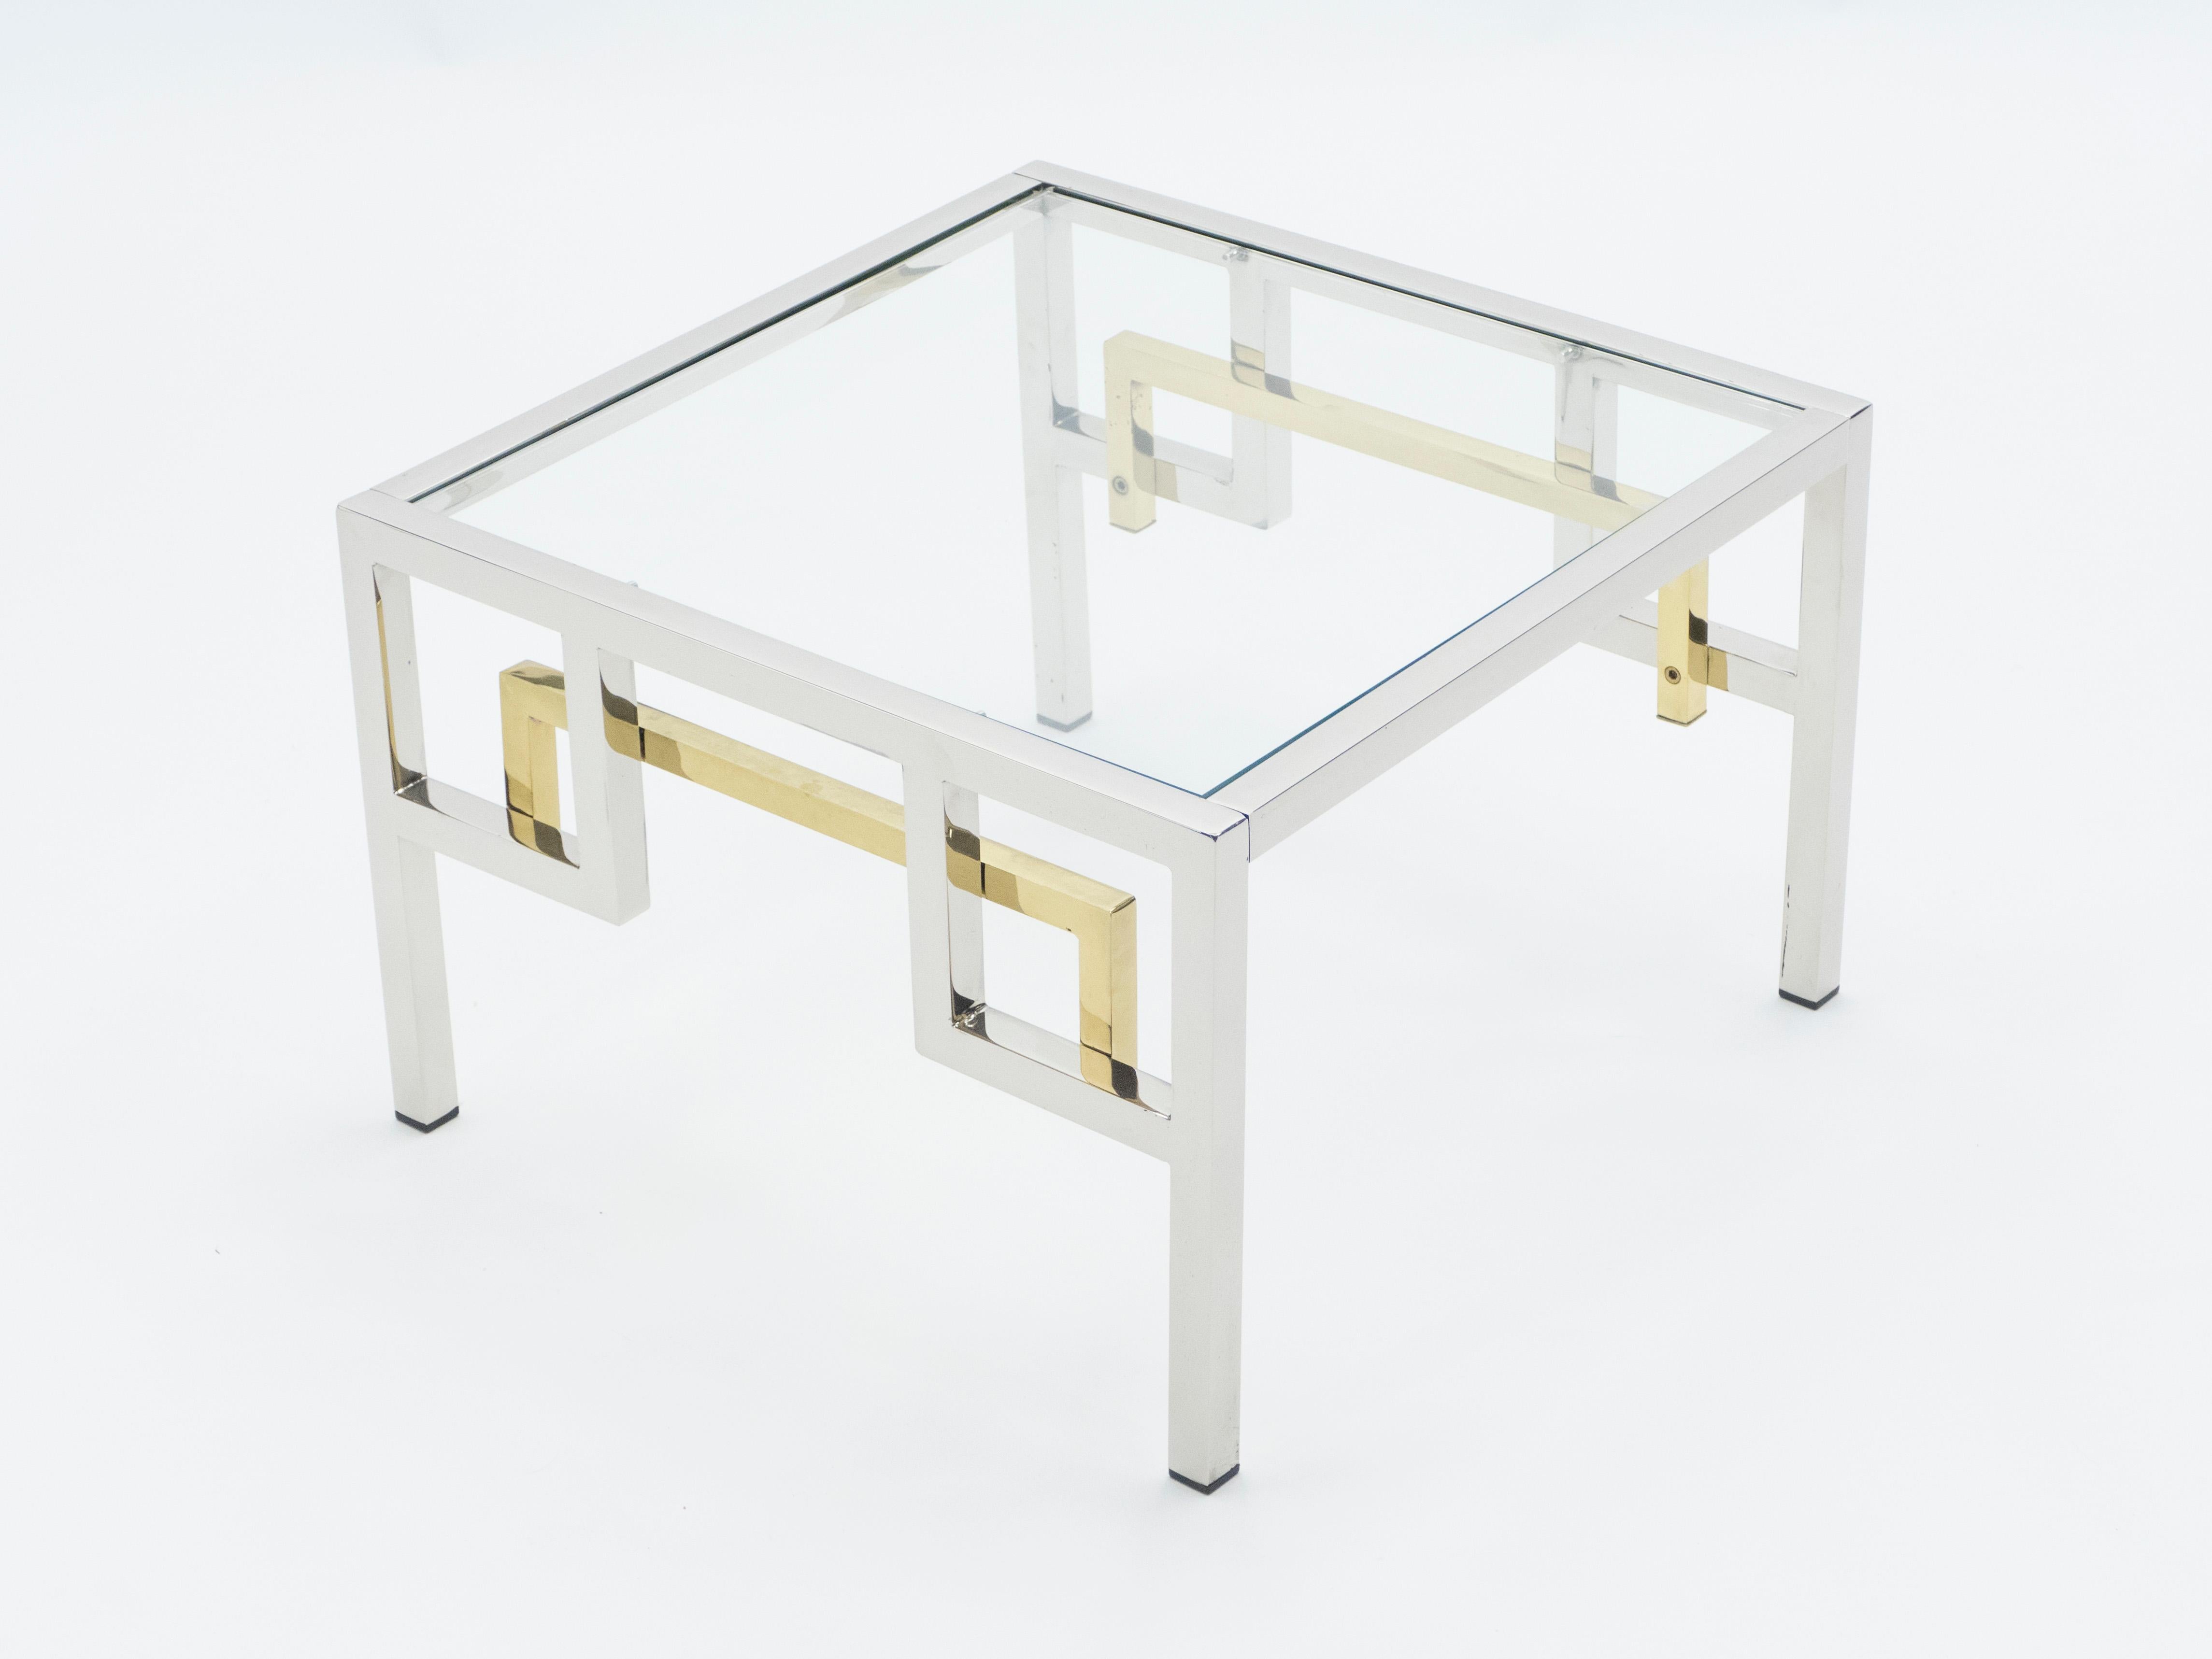 Late 20th Century Midcentury Brass Chrome Side Tables by Guy Lefèvre for Maison Jansen, 1970s For Sale